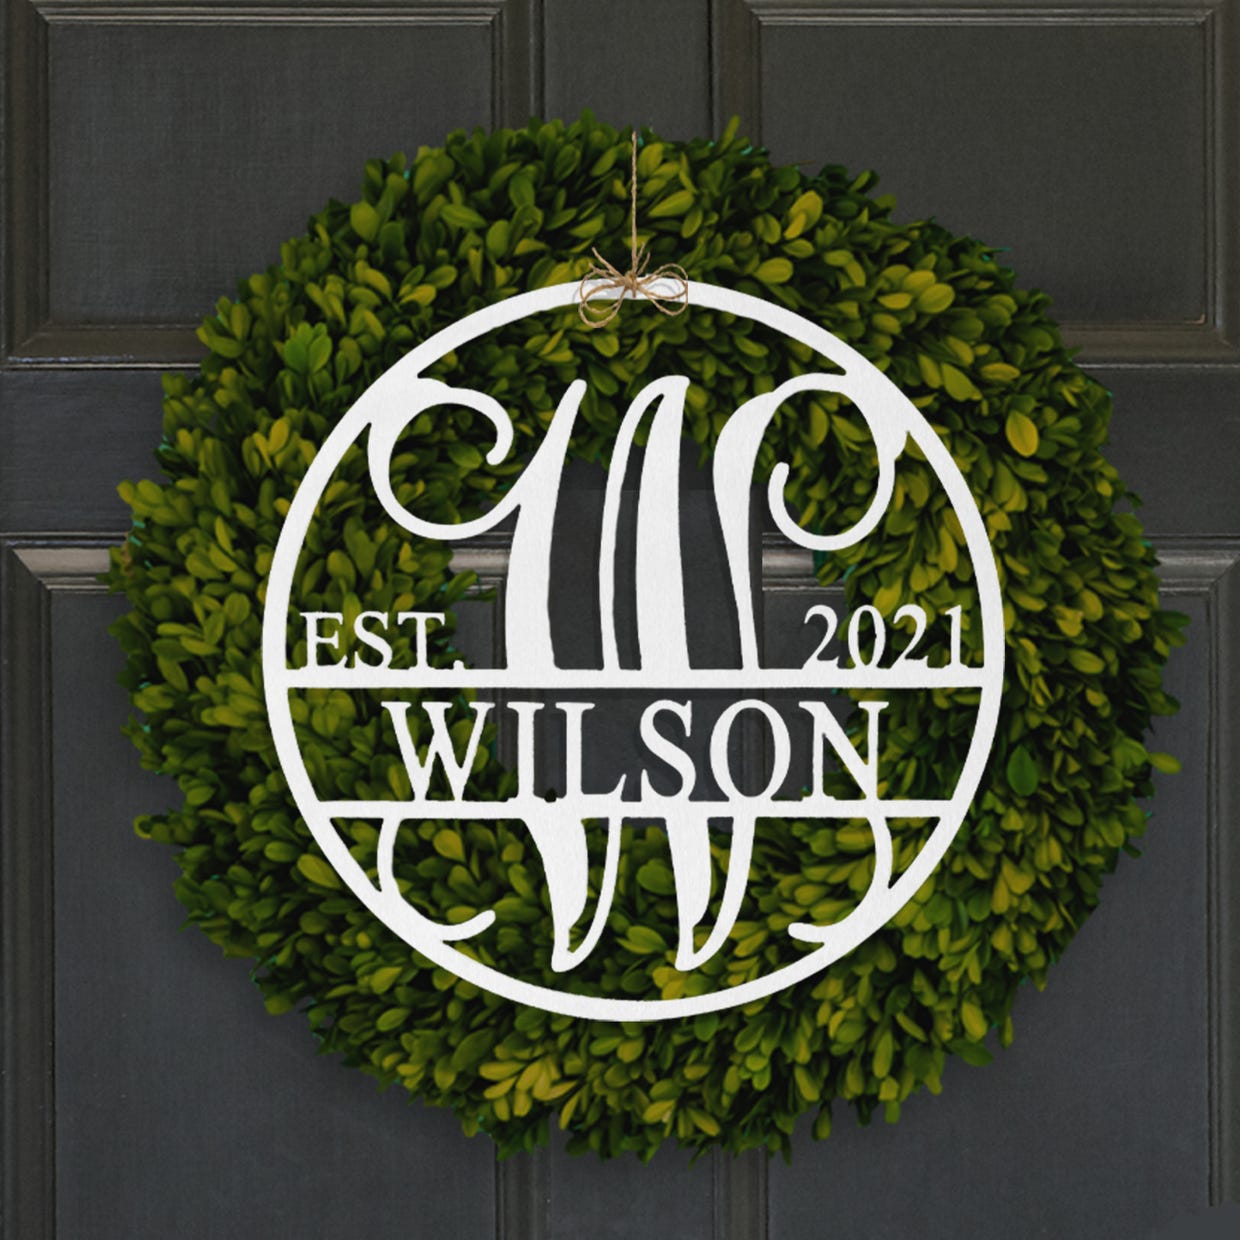 A green leafy wreath with a personalized white monogram sign featuring a family name and established year.